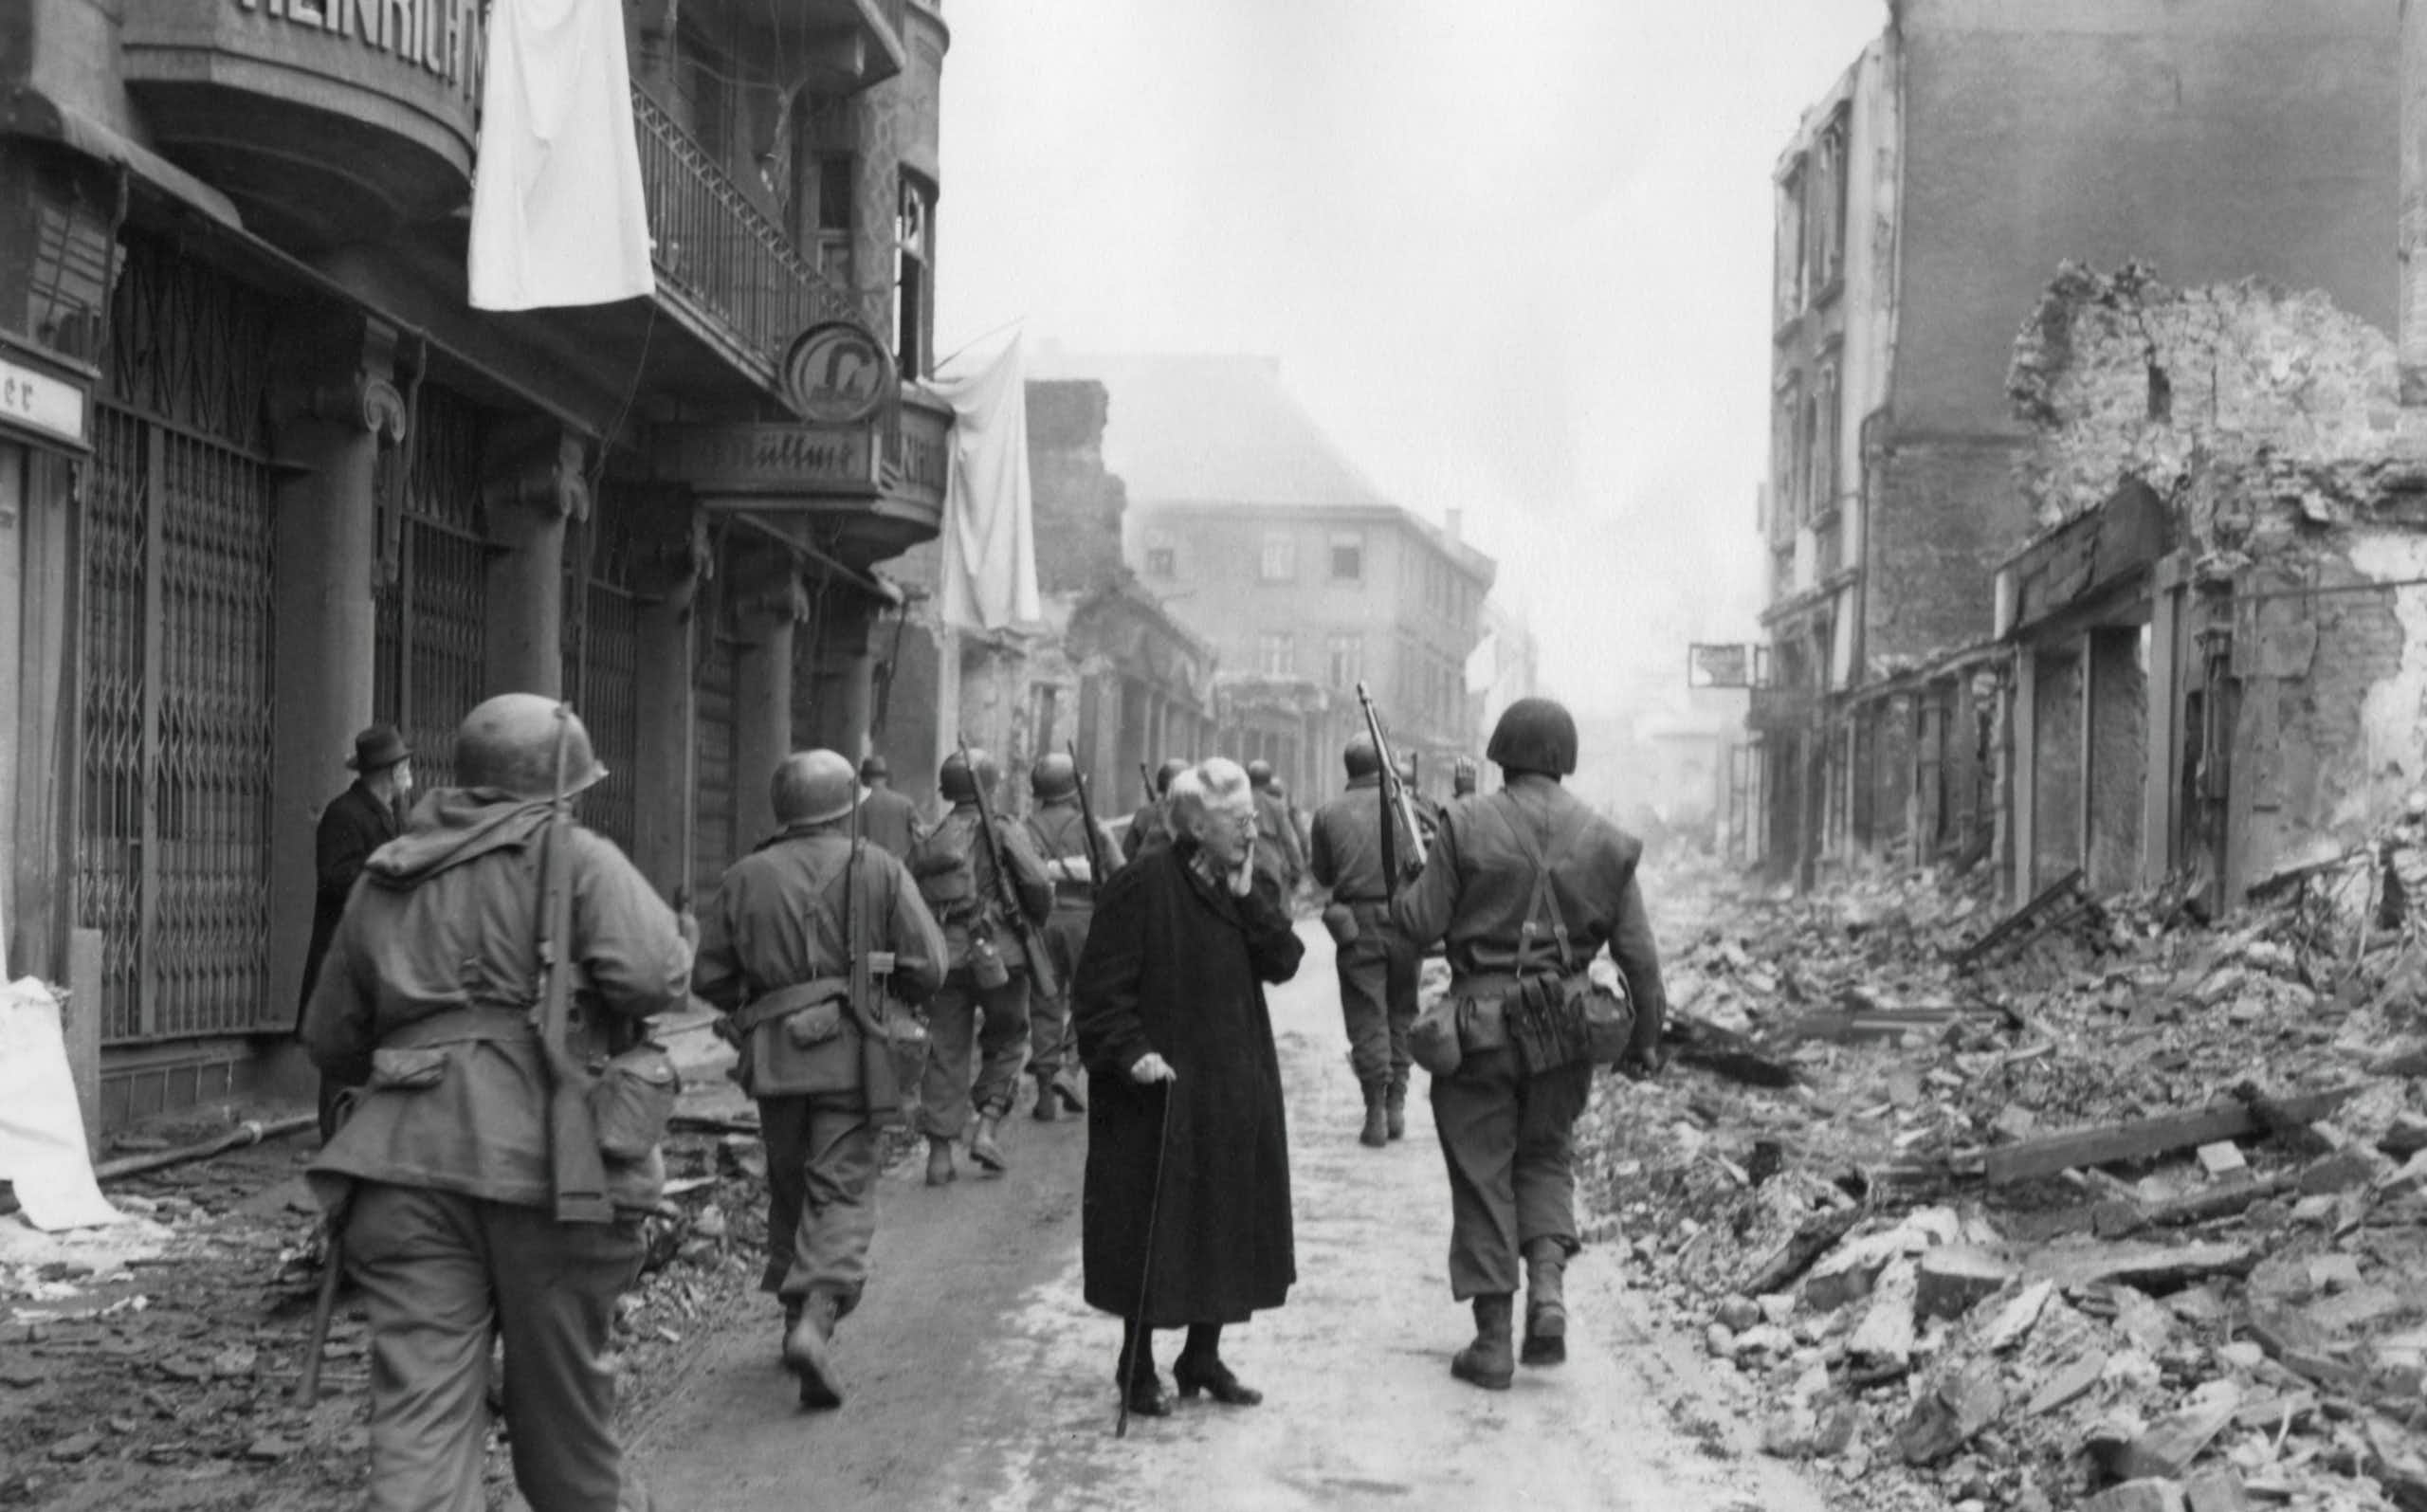 As infantrymen march through a German town, a shocked old woman stares at a the ruins.